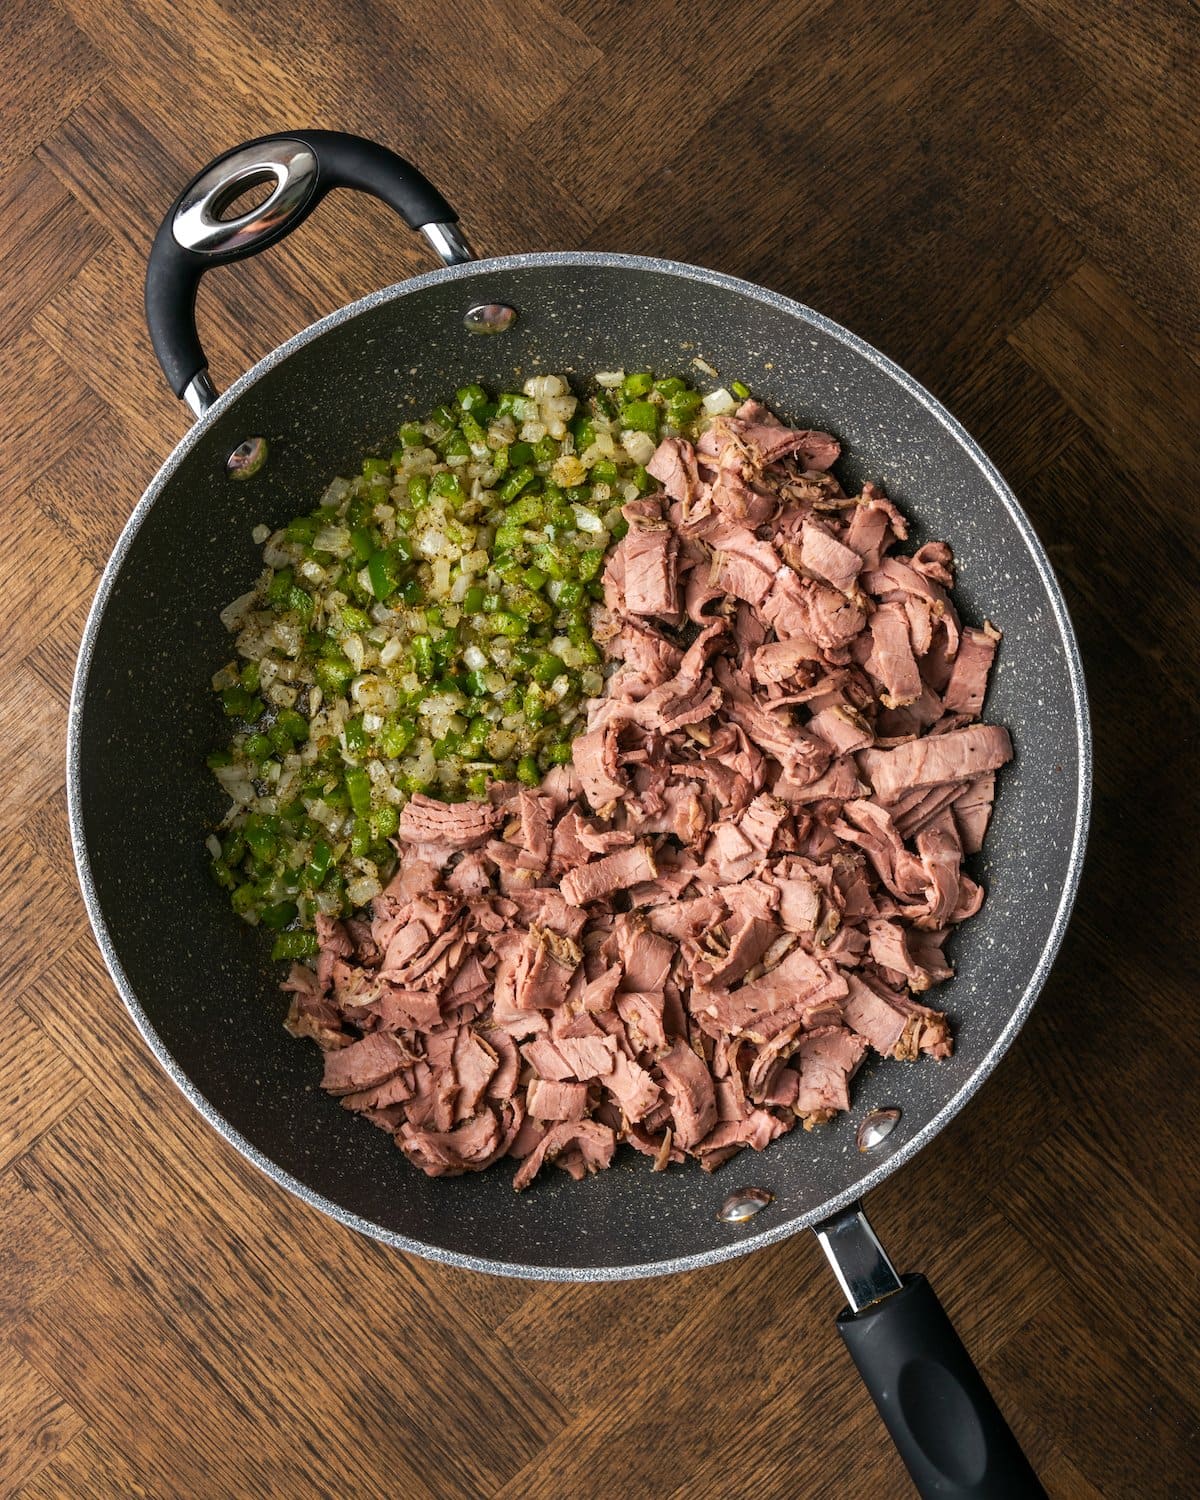 Sliced roast beef added to a skillet with sautéed diced onions and peppers.